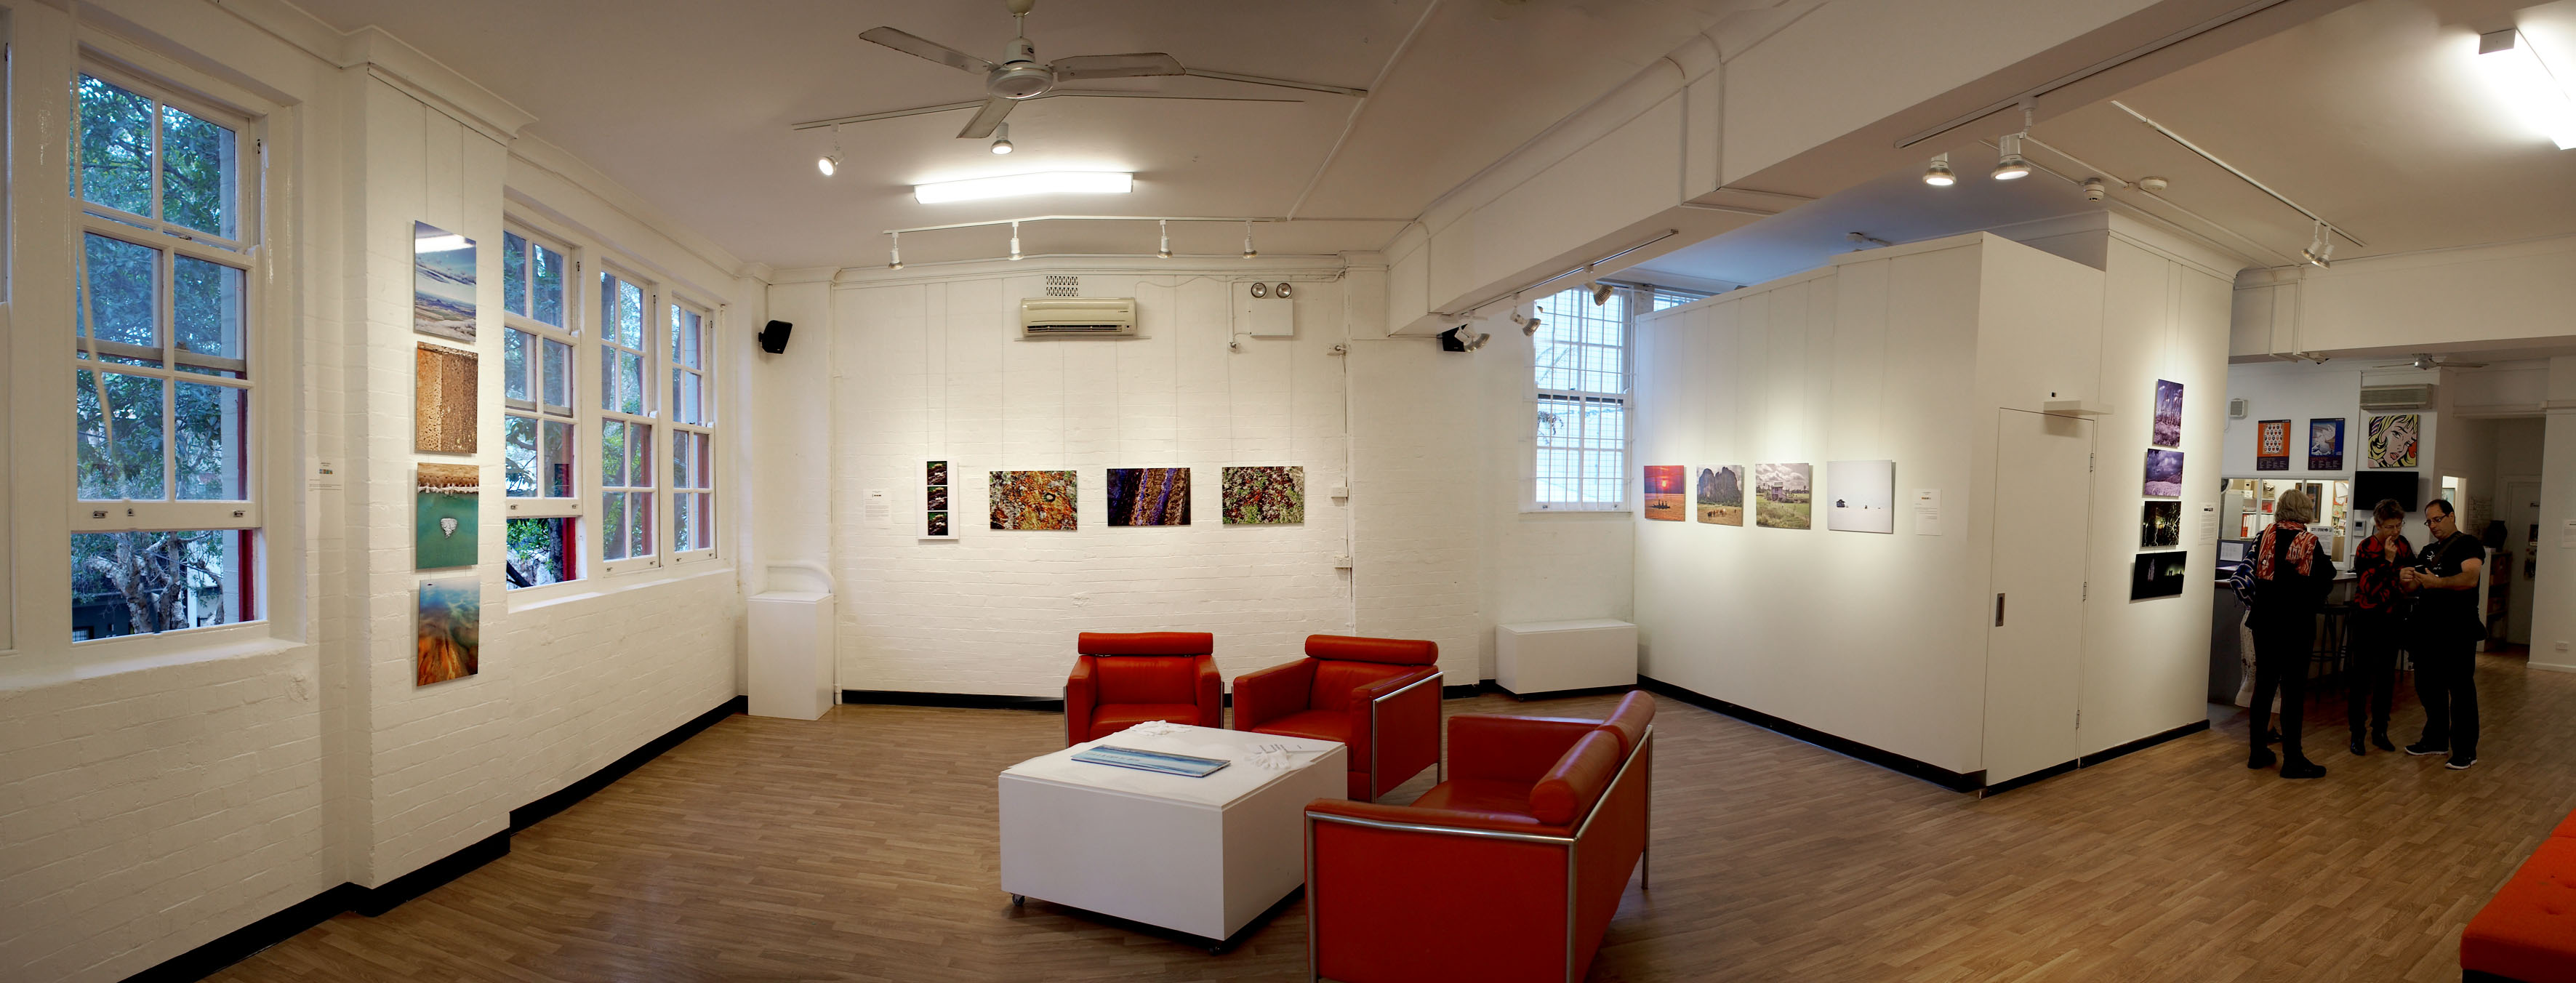 The exhibition 'Around the world in 14 days' in the Pine Street Gallery